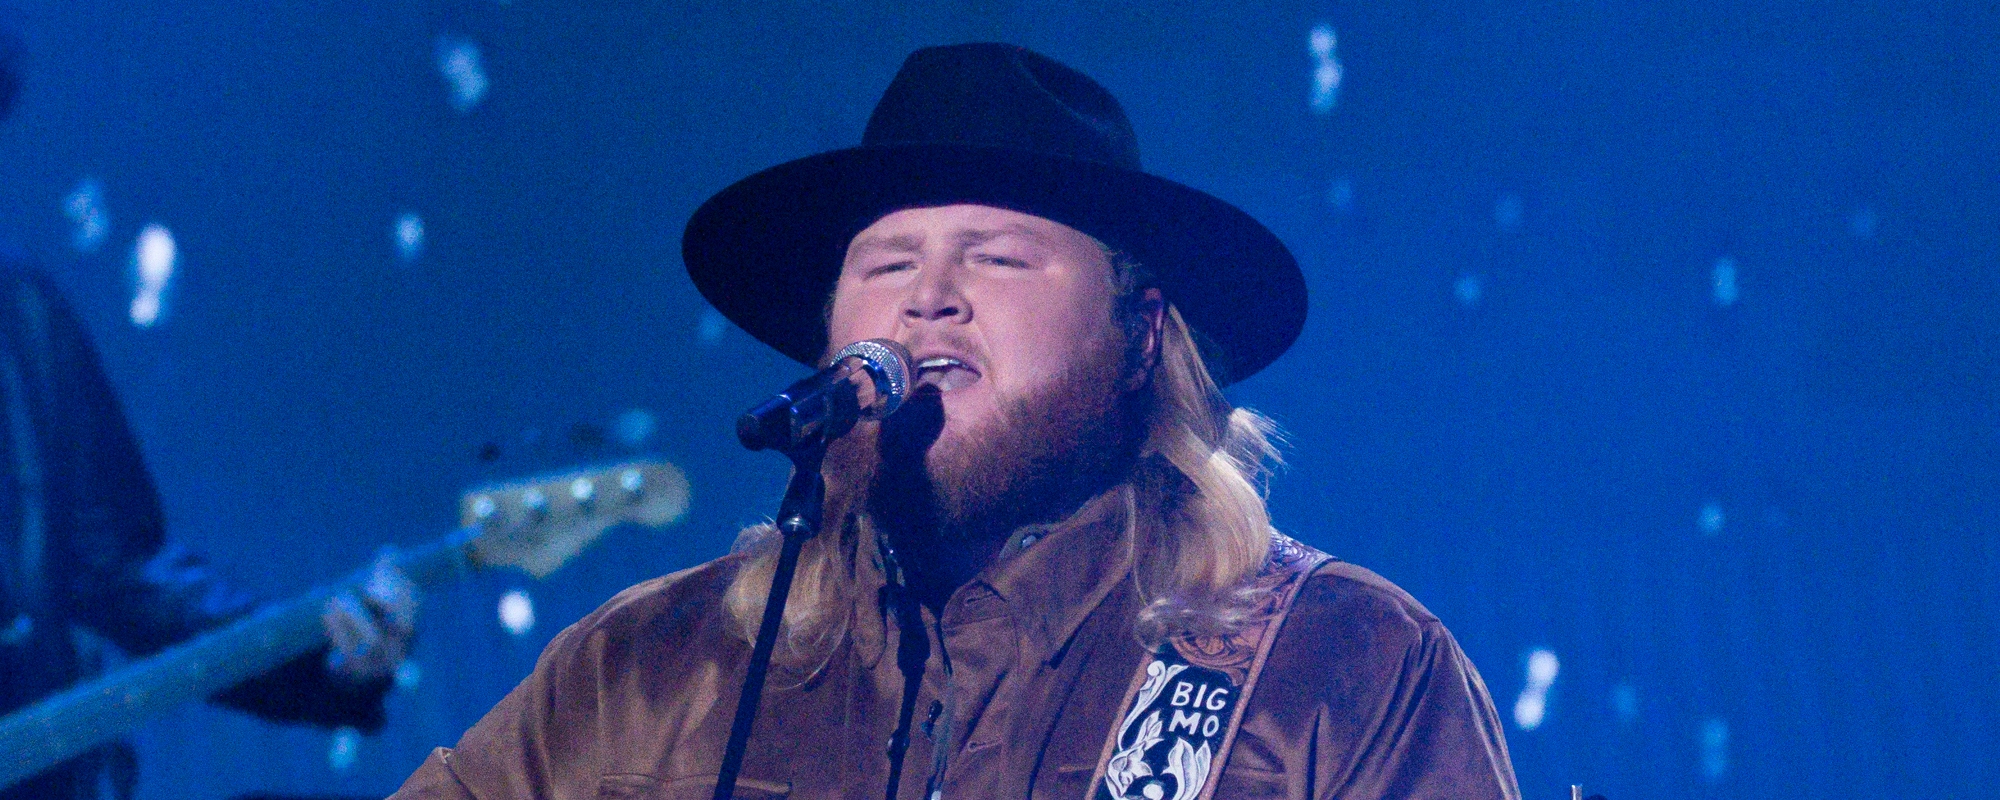 ‘American Idol’ Finalist Will Moseley Rocks the Stage With Bon Jovi’s “It’s My Life” and Montgomery Gentry’s “My Town”